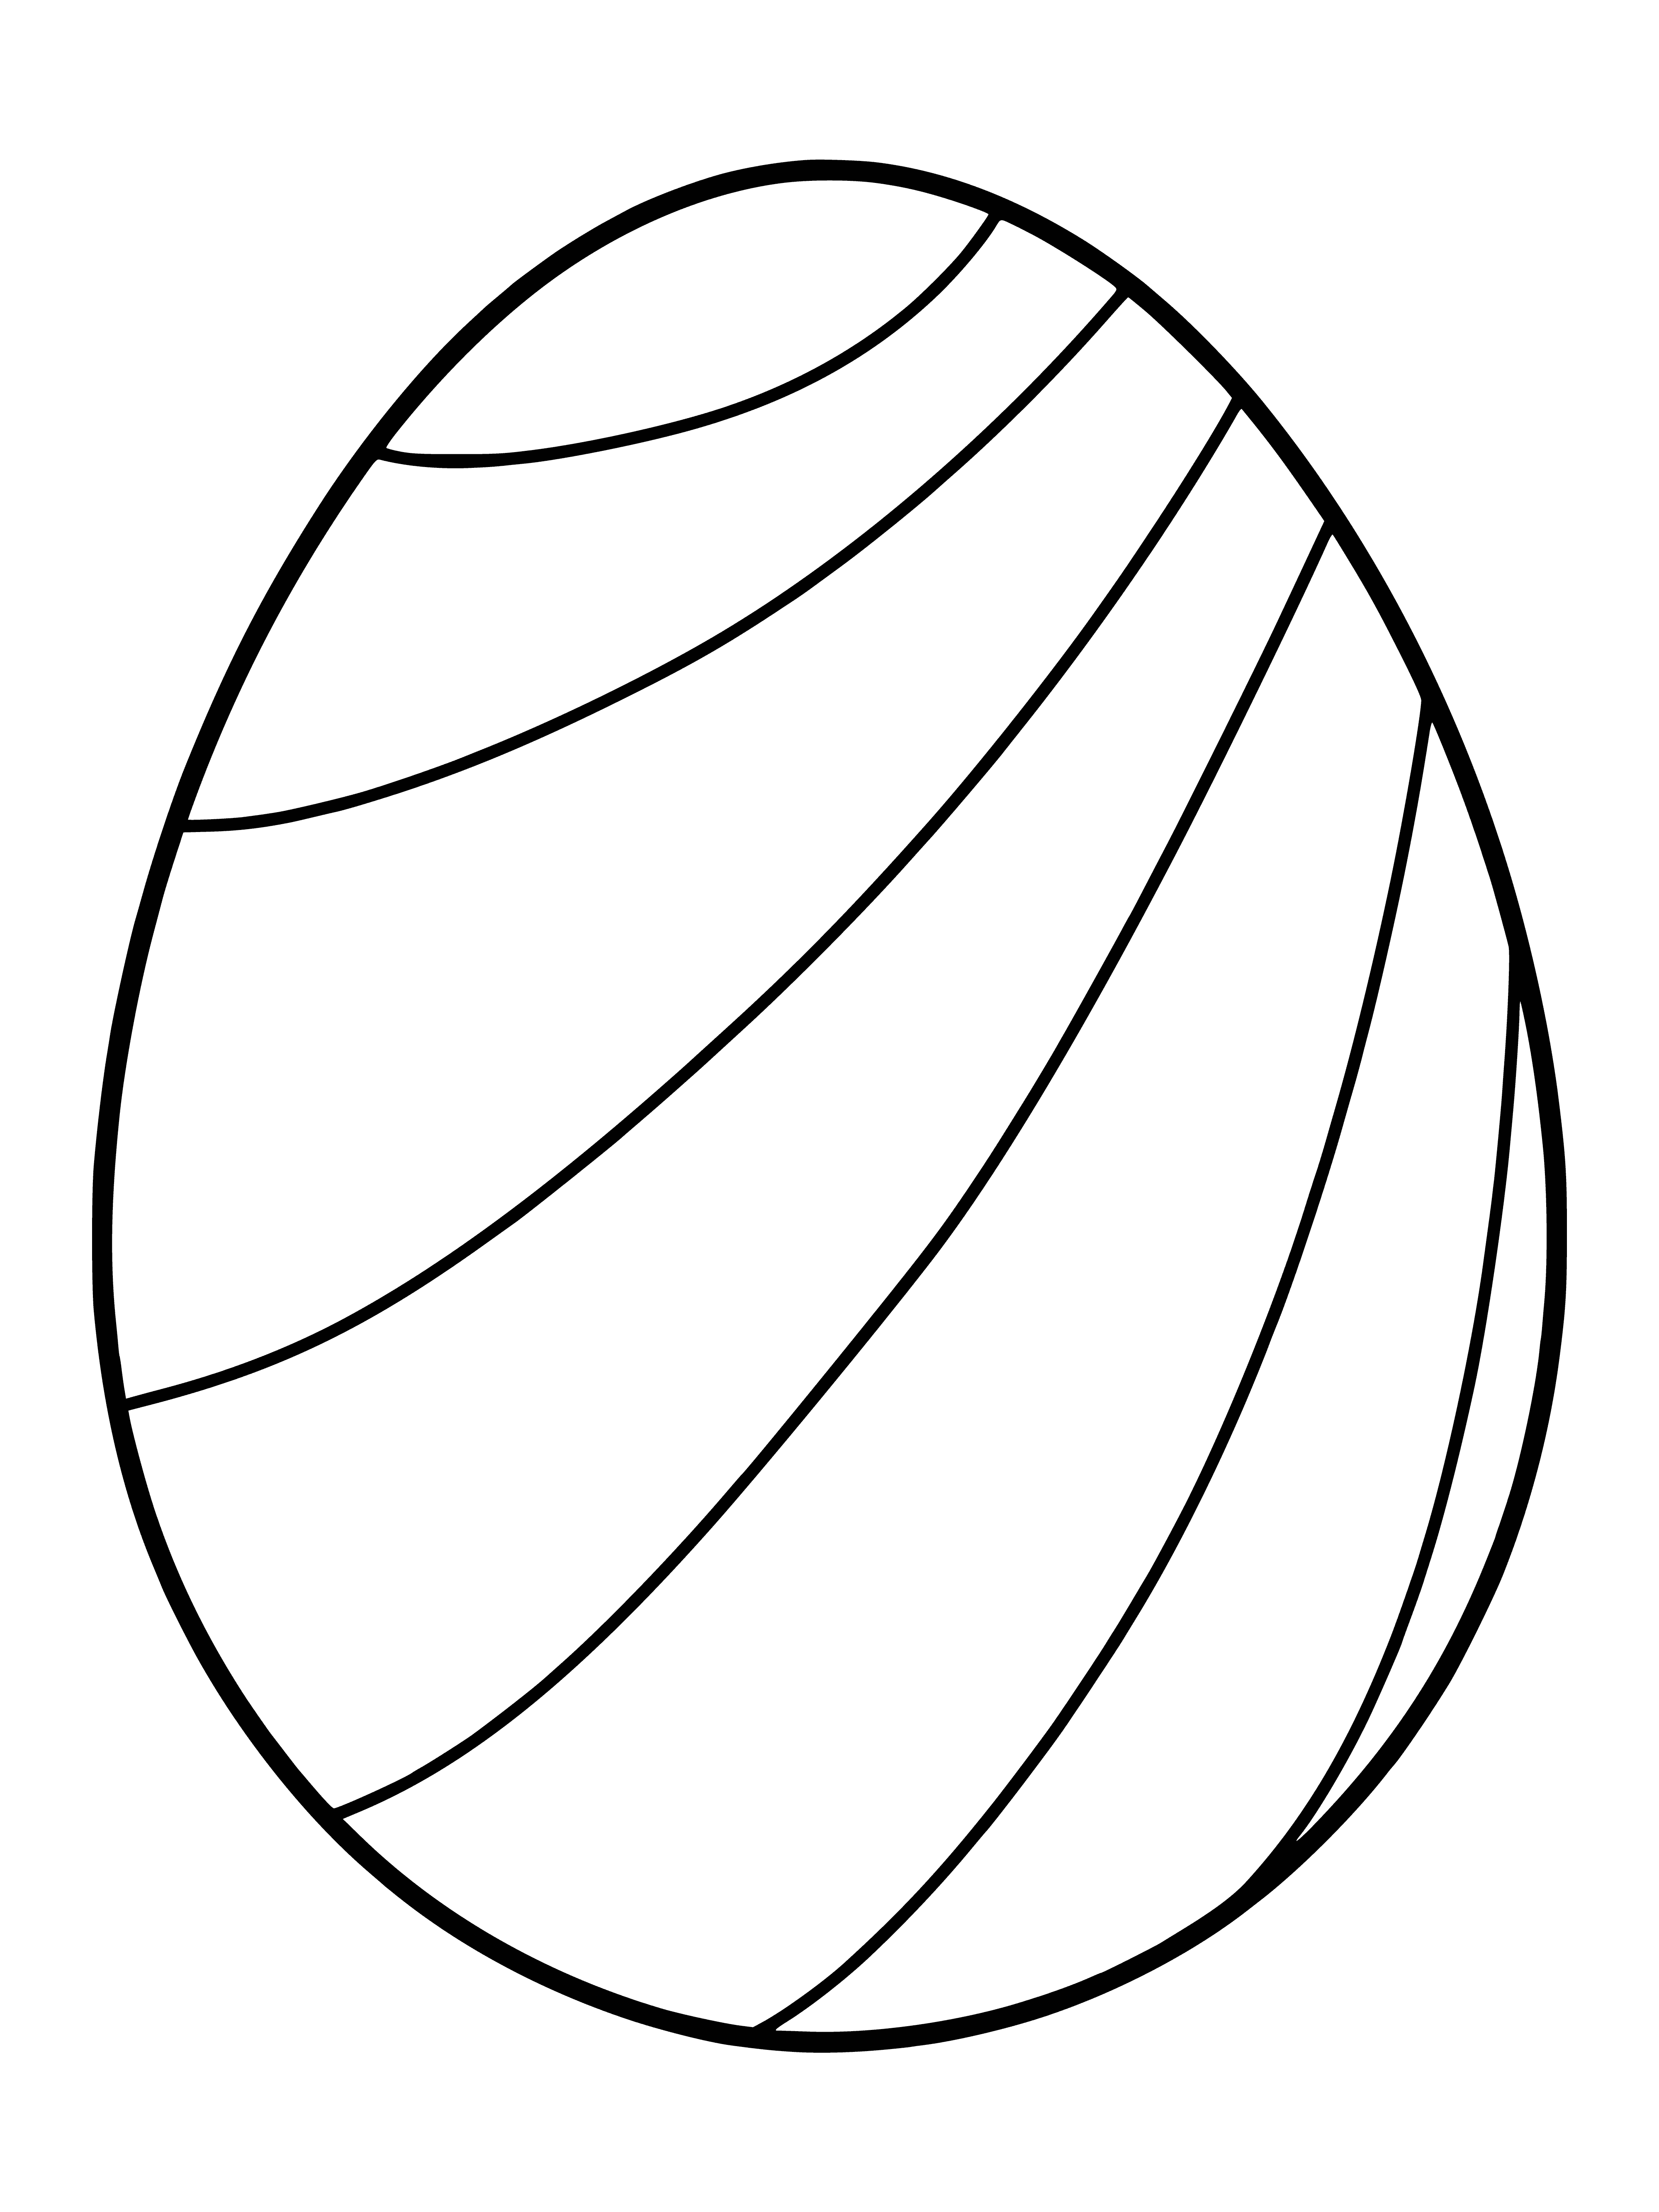 coloring page: #EasterEggs